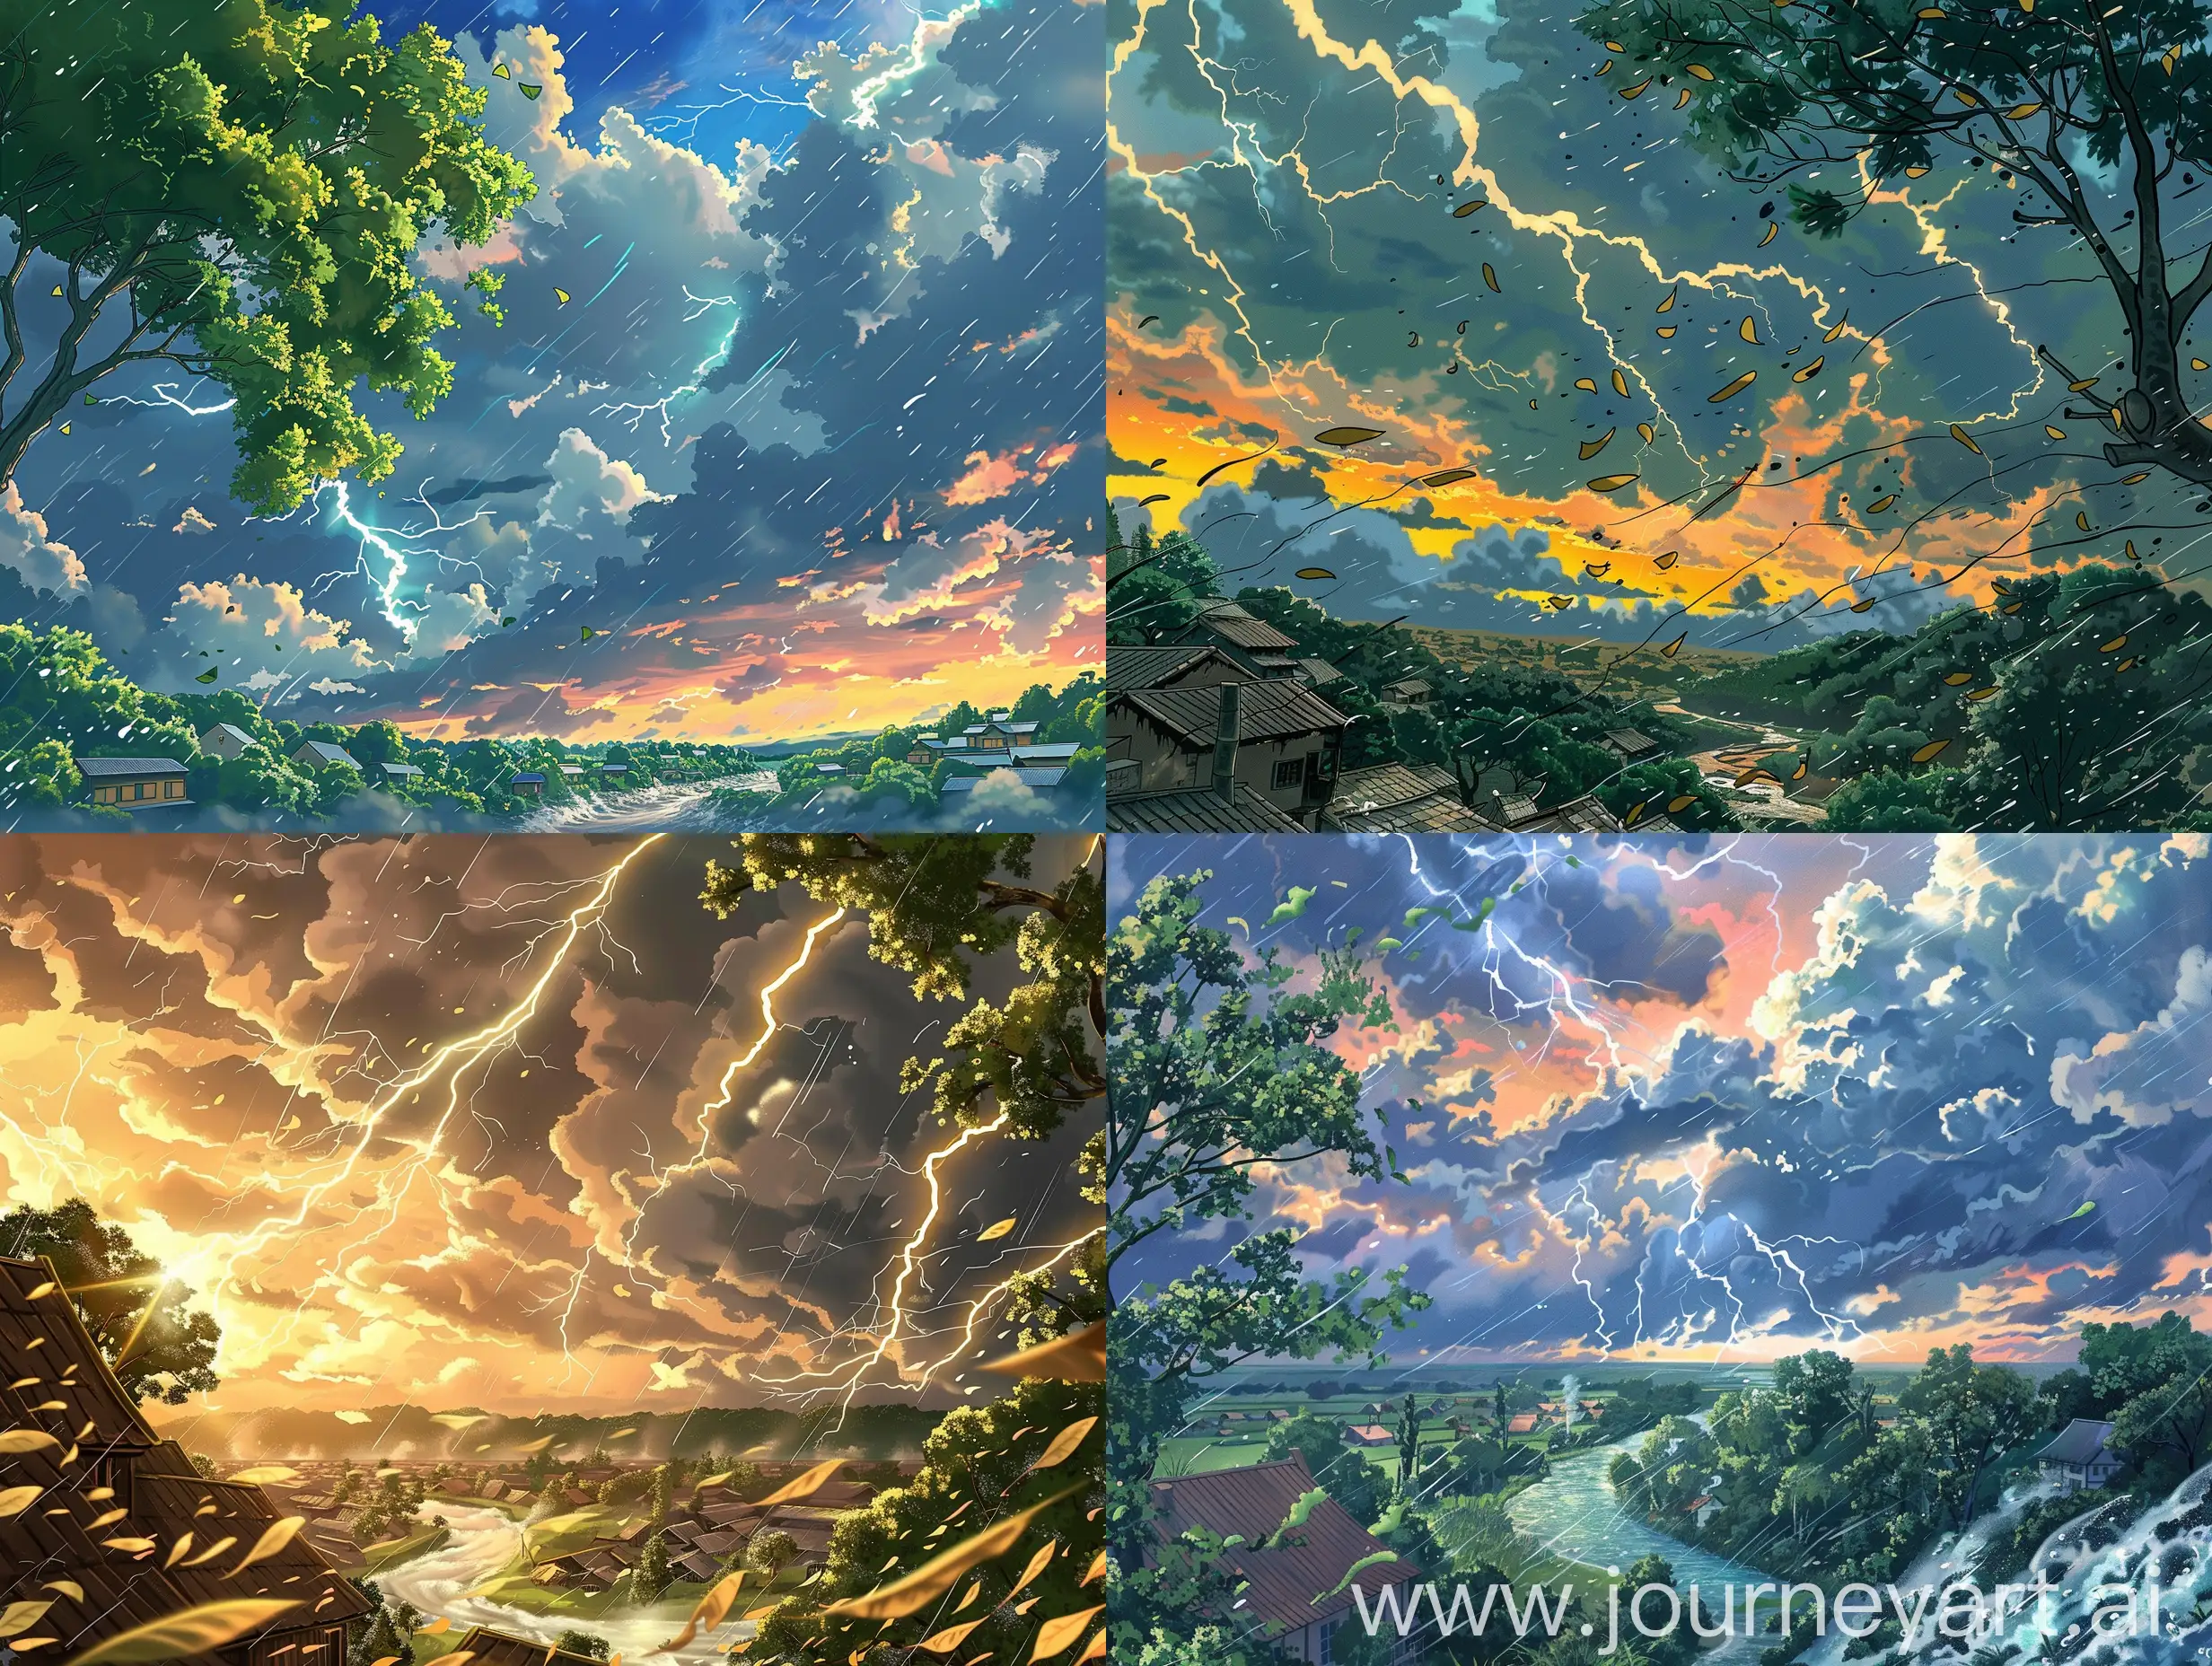 Anime-Style-Village-Landscape-with-Raging-River-and-Lightning-Sparks